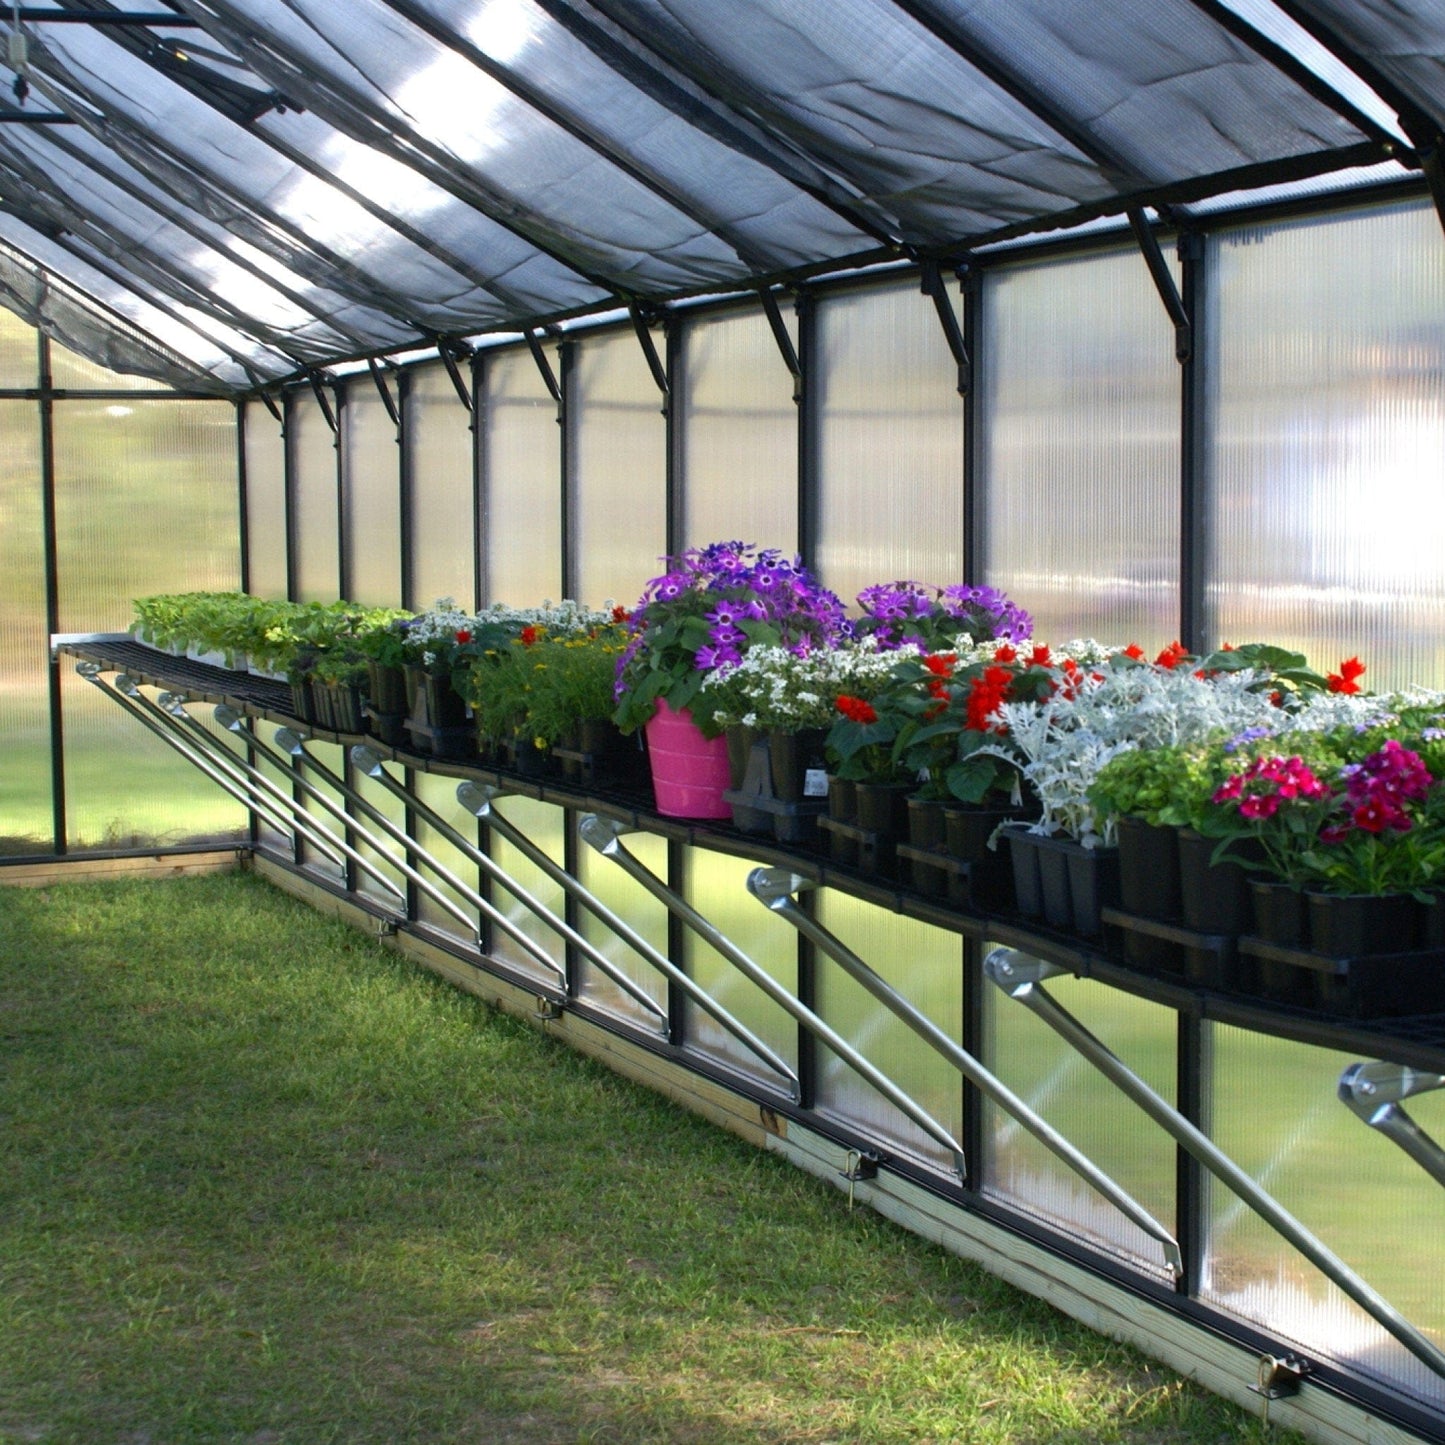 Riverstone Industries Workbench System For Monticello Greenhouses - mygreenhousestore.com